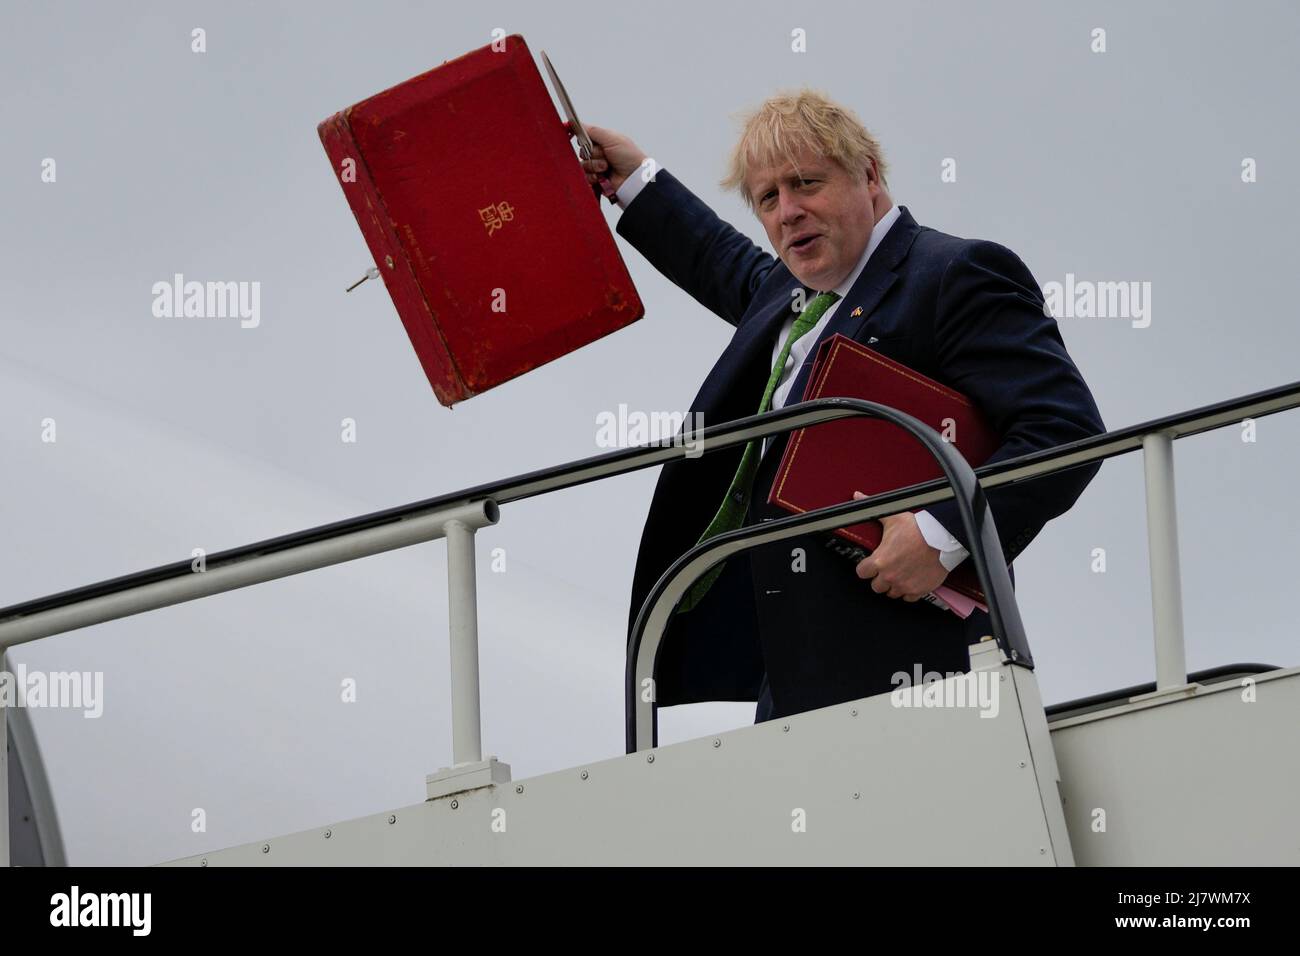 British Prime Minister Boris Johnson reacts as he boards a plane to visit Sweden and Finland, at London Stansted Airport, Britain, May 11, 2022. Frank Augstein/Pool via REUTERS Stock Photo